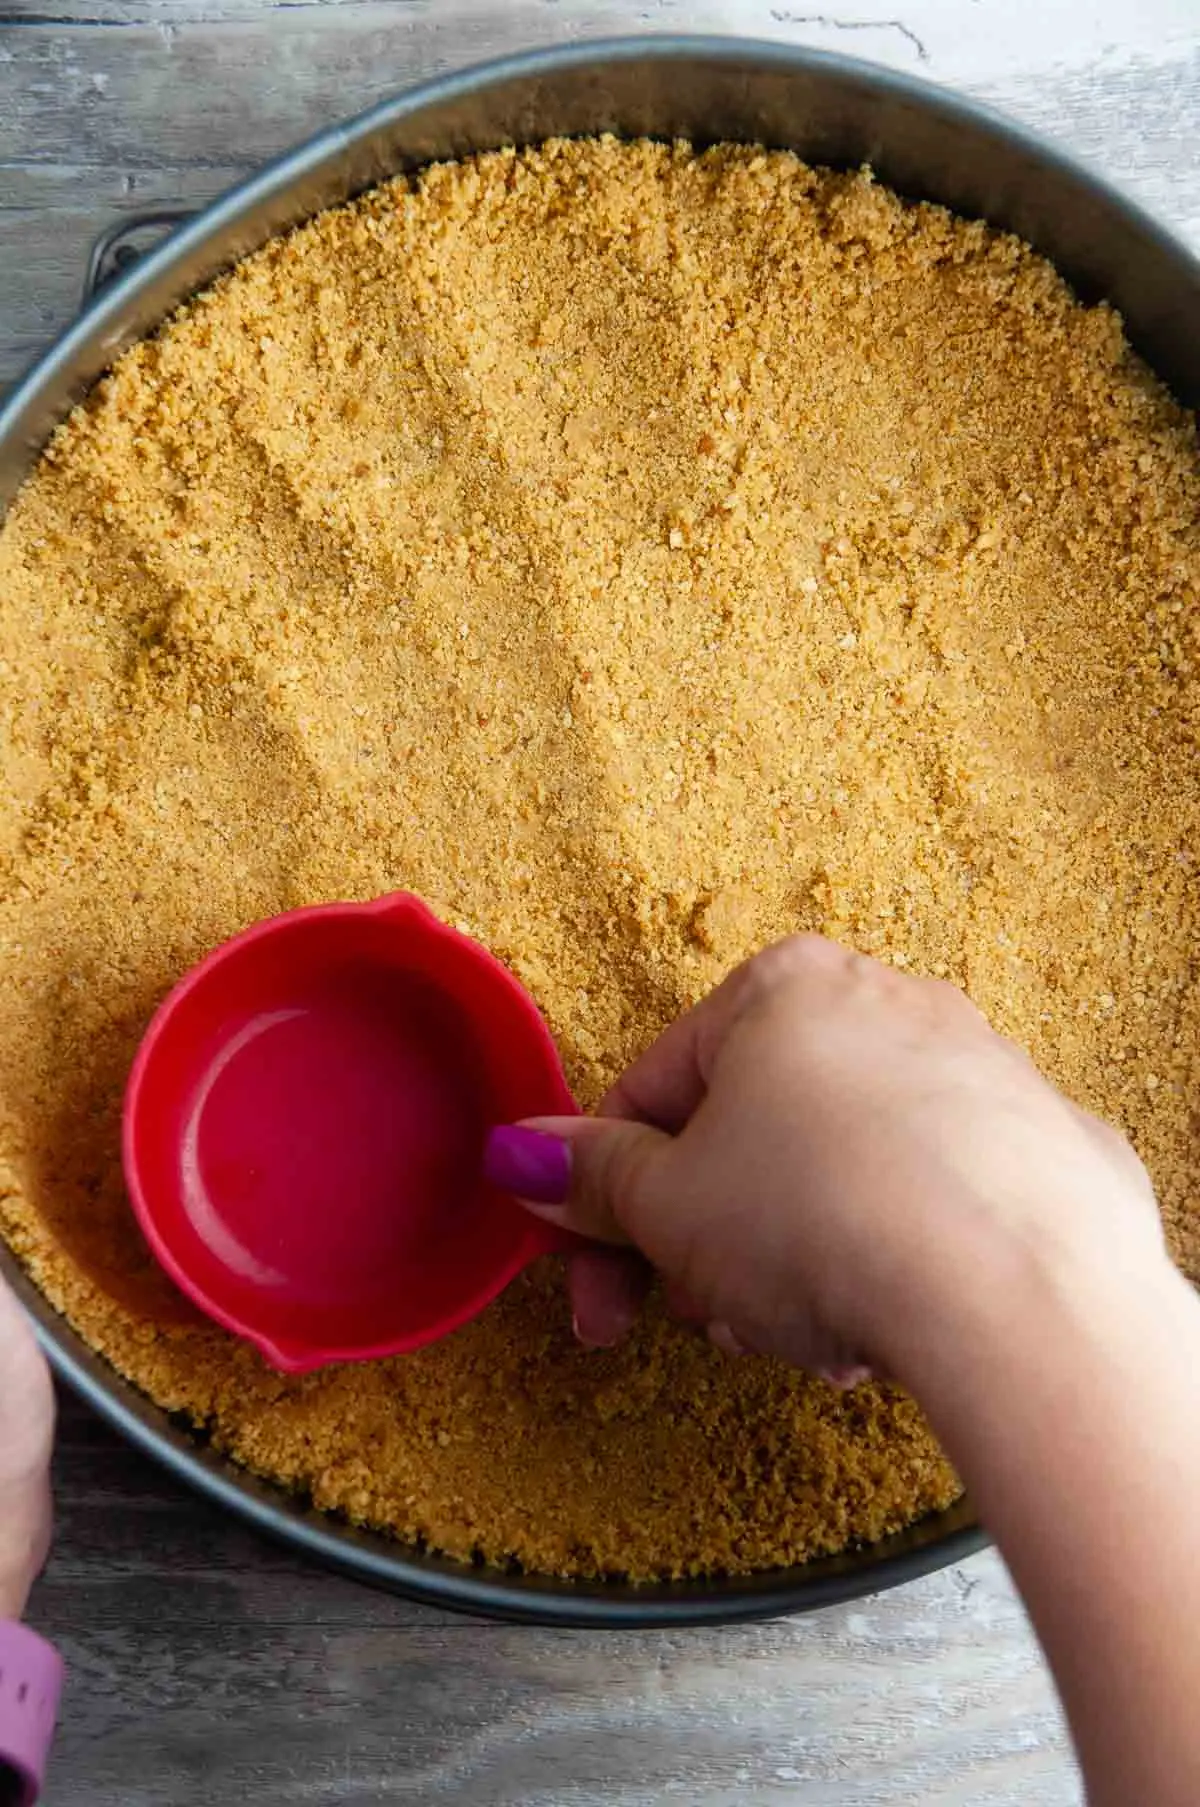 Use a measuring cup to press the graham cracker crust evenly into the plate and up the sides